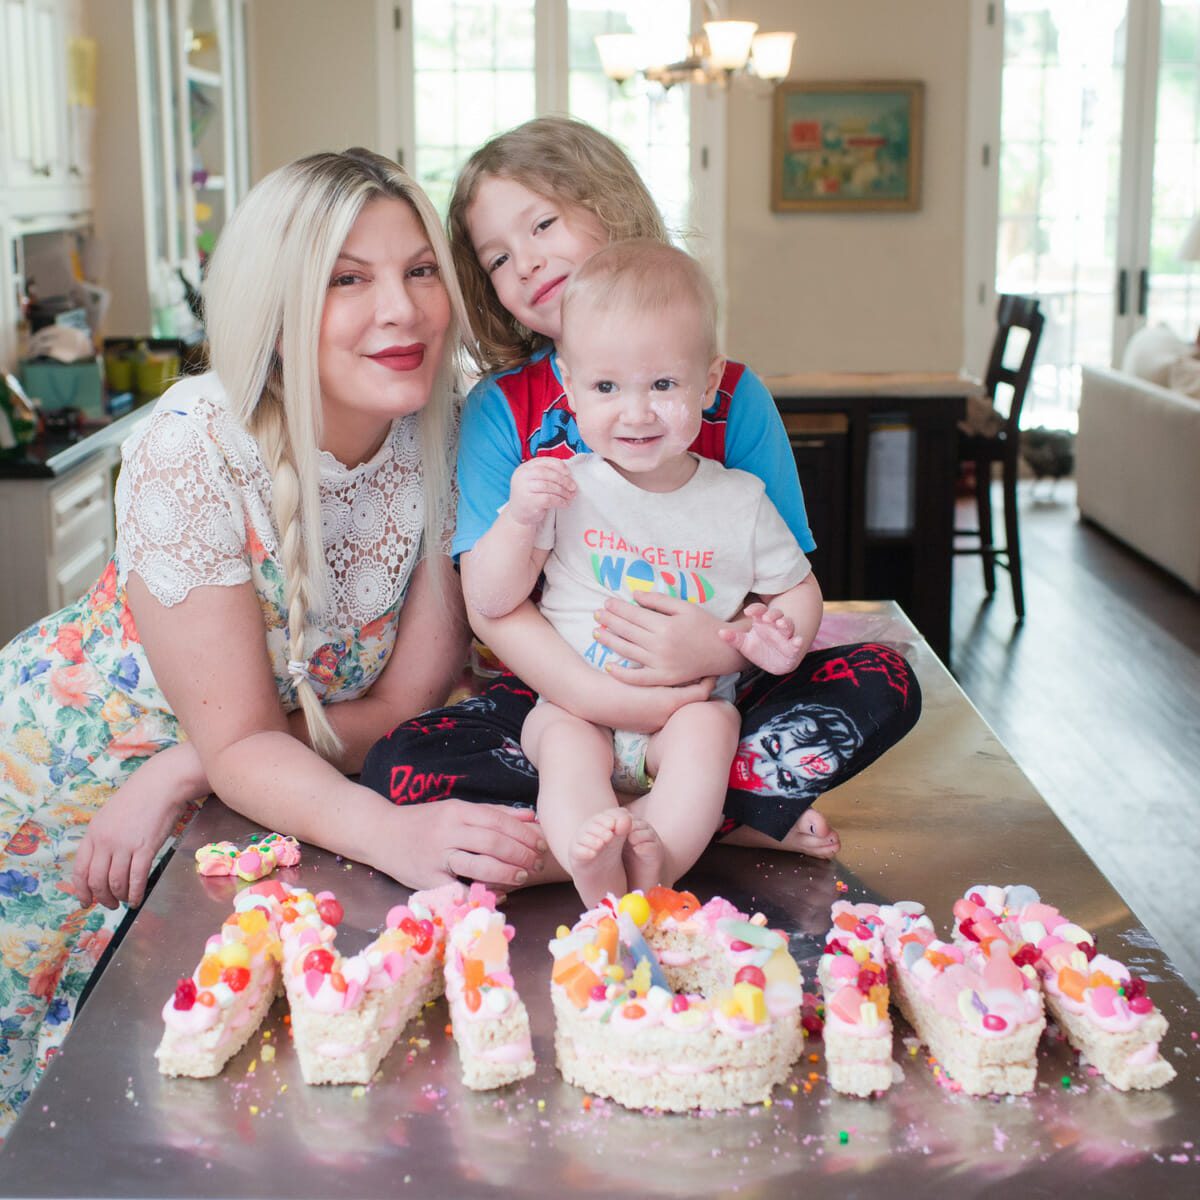 Mother’s Day Rice Krispy Cake with Tori Spelling | Mother's Day dessert recipes | Mother's Day ideas for kids | kid friendly Mother's Day desserts || JennyCookies.com #recipes #ricekrispy #cakerecipes #mothersday